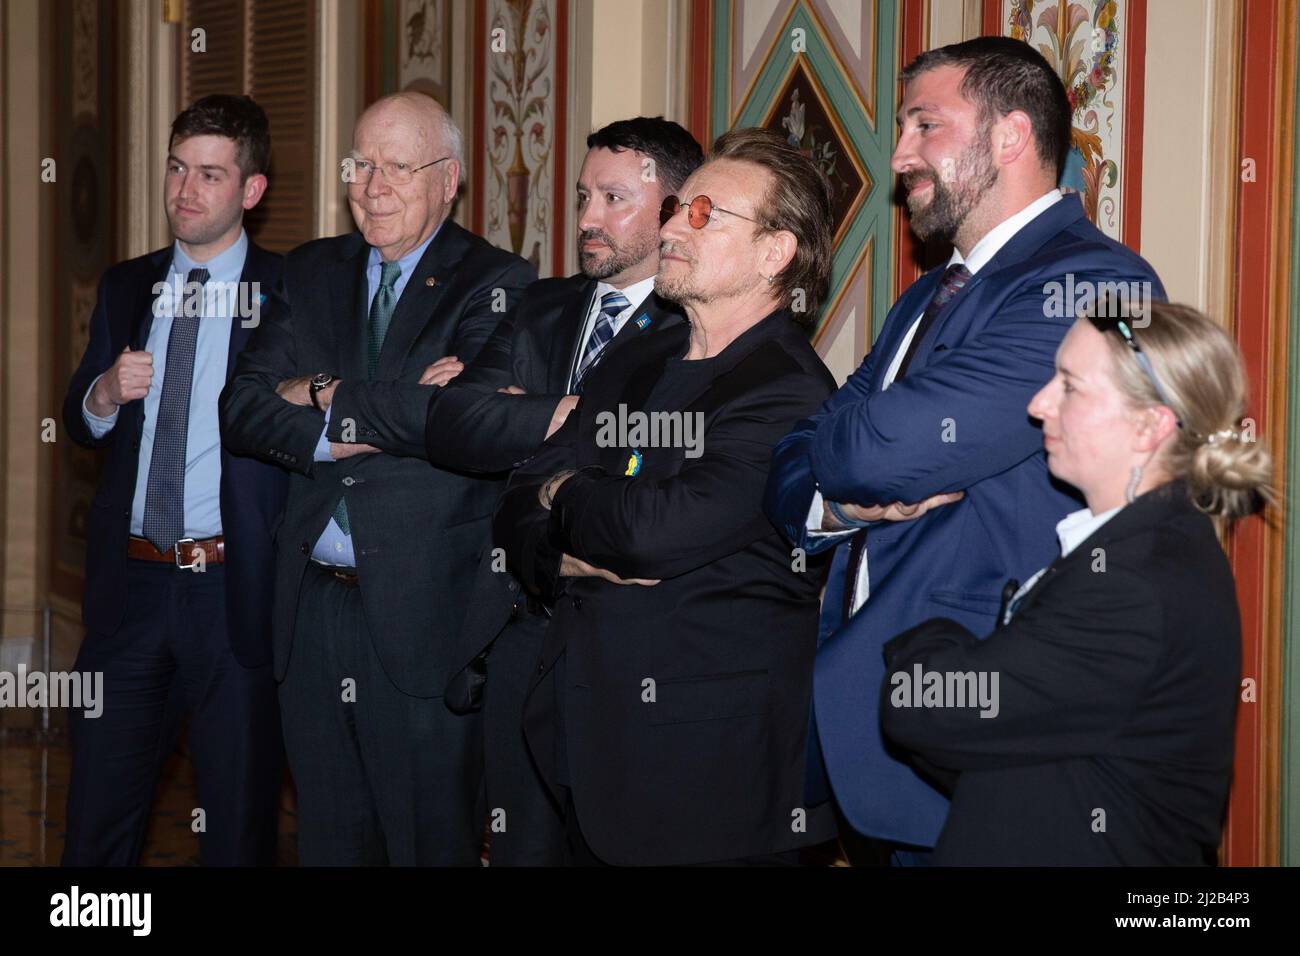 Bono, an Irish singer-songwriter, meets with members of the Capitol Police and United States Senator Patrick Leahy (Democrat of Vermont) during his visit to Capitol Hill on March 30, 2022 in Washington D.C, U.S Credit: Aaron Schwartz / CNP/Sipa USA Stock Photo